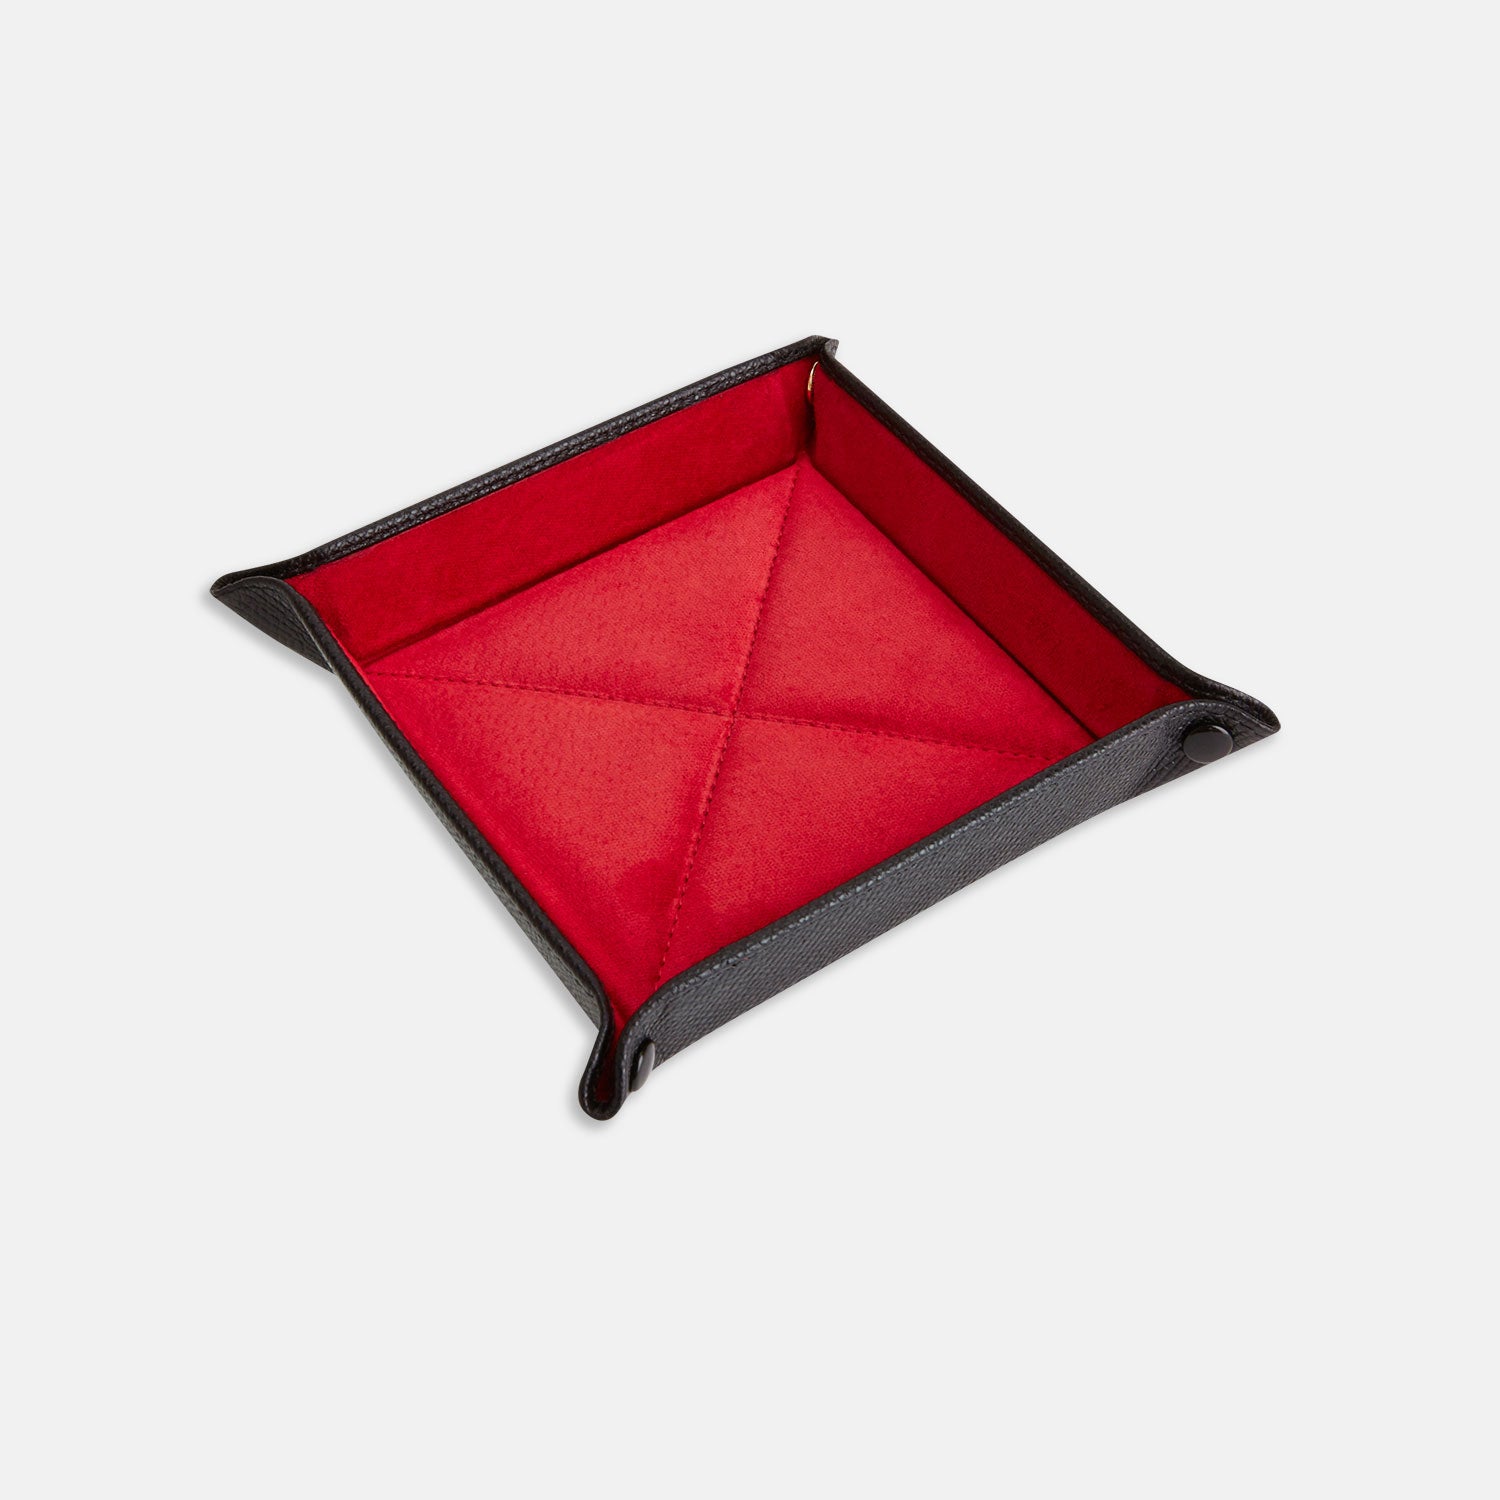 Black and Red Square Leather Travel Tray